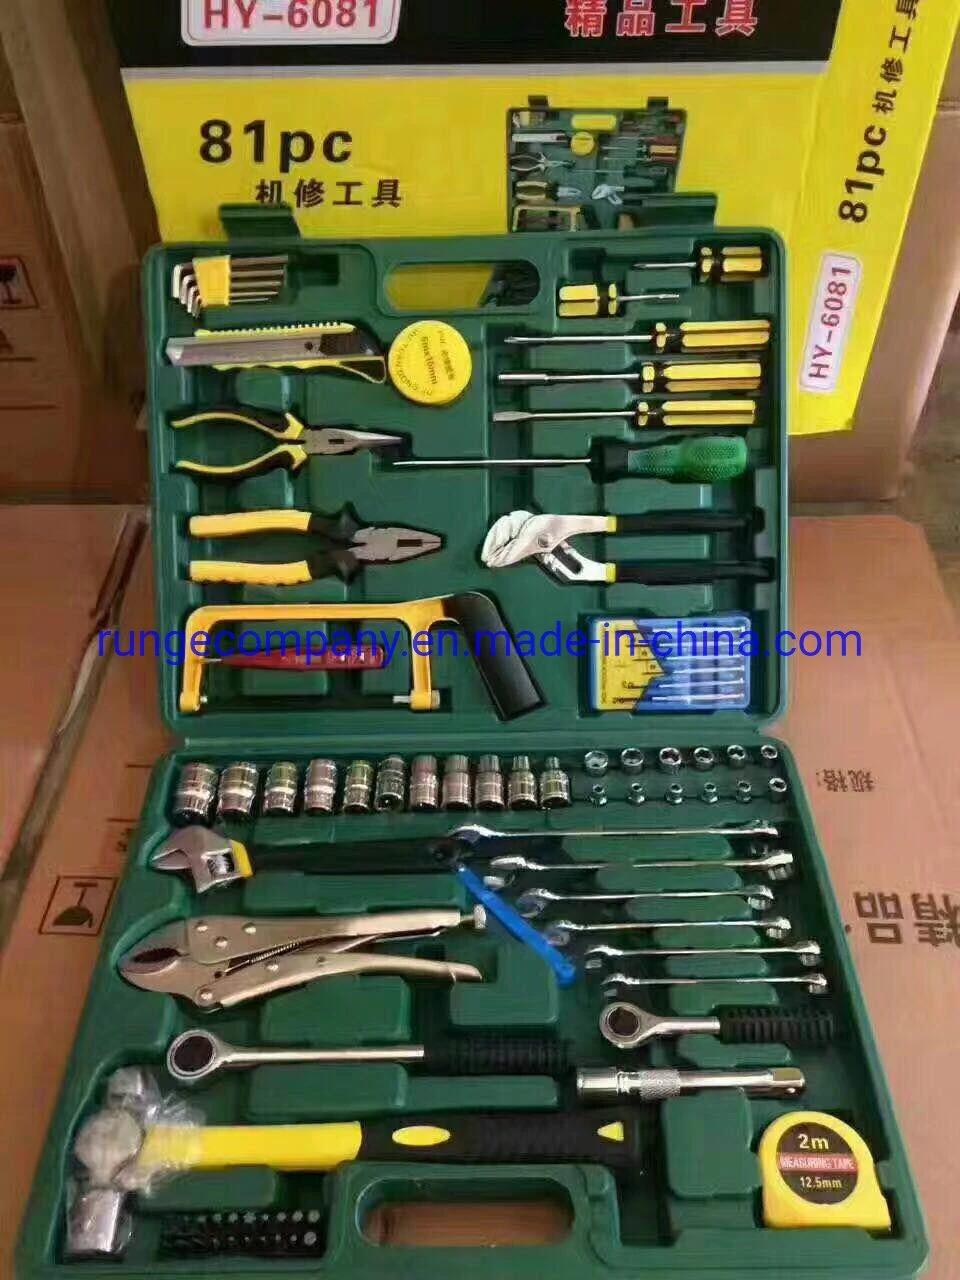 45PCS/Set Tool Set with Universal Wrench Wire Stripper Blades for Household Electrical Engineering